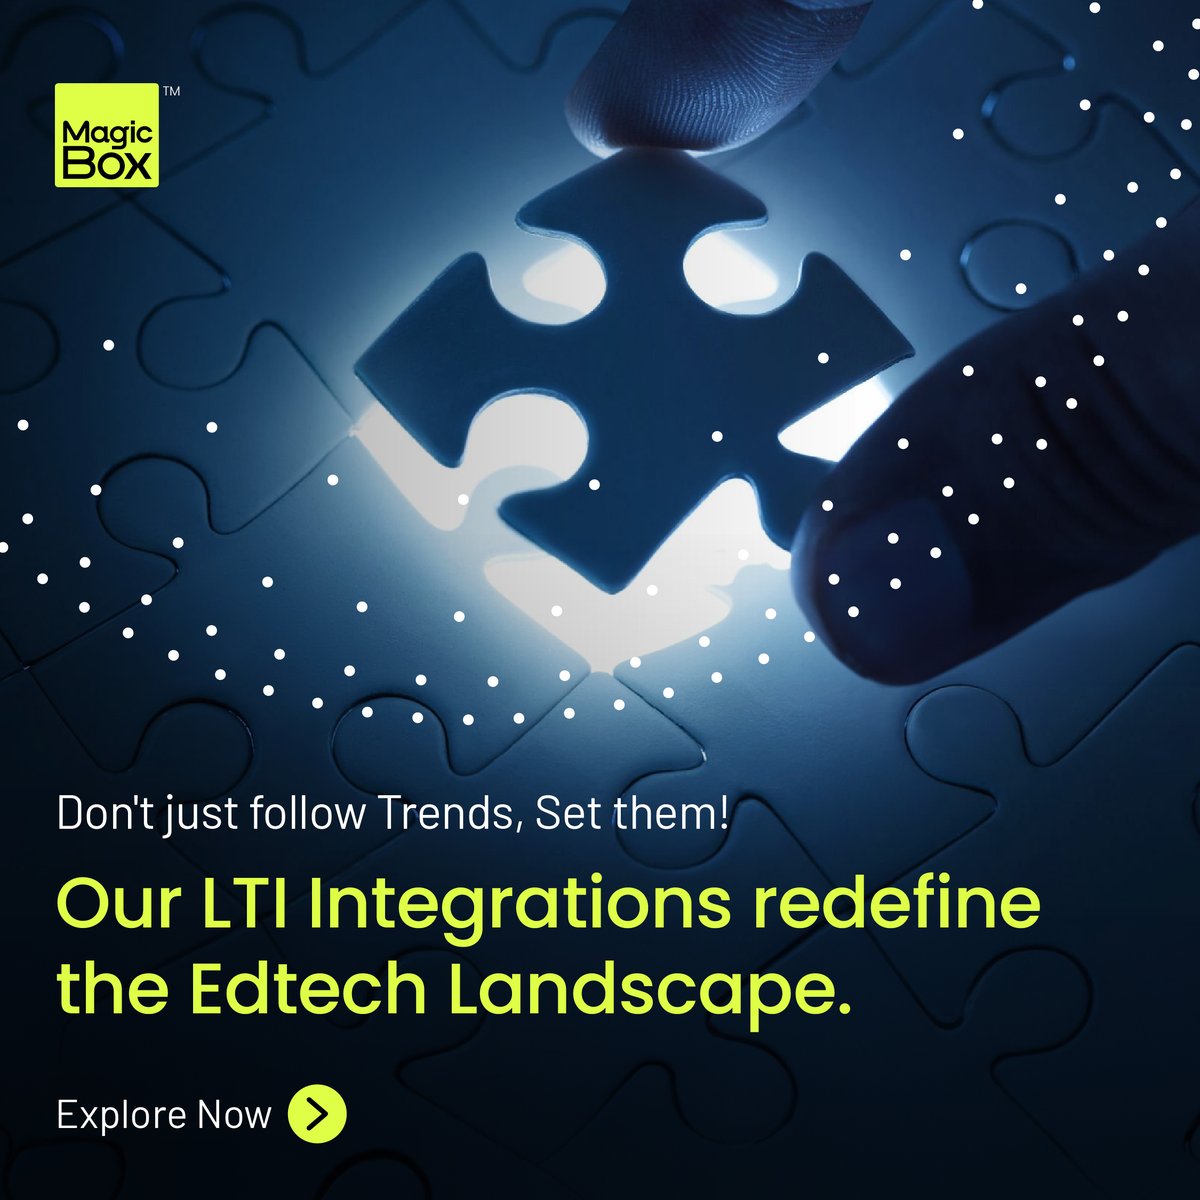 Struggling to navigate the complexities of EdTech advancements? 
Discover a smoother path with our LTI Integrations, reshaping the educational landscape for the better. 
Learn more here - lnkd.in/edKAG9Y
#LTIintegrations #Edtech #DigitalLearning